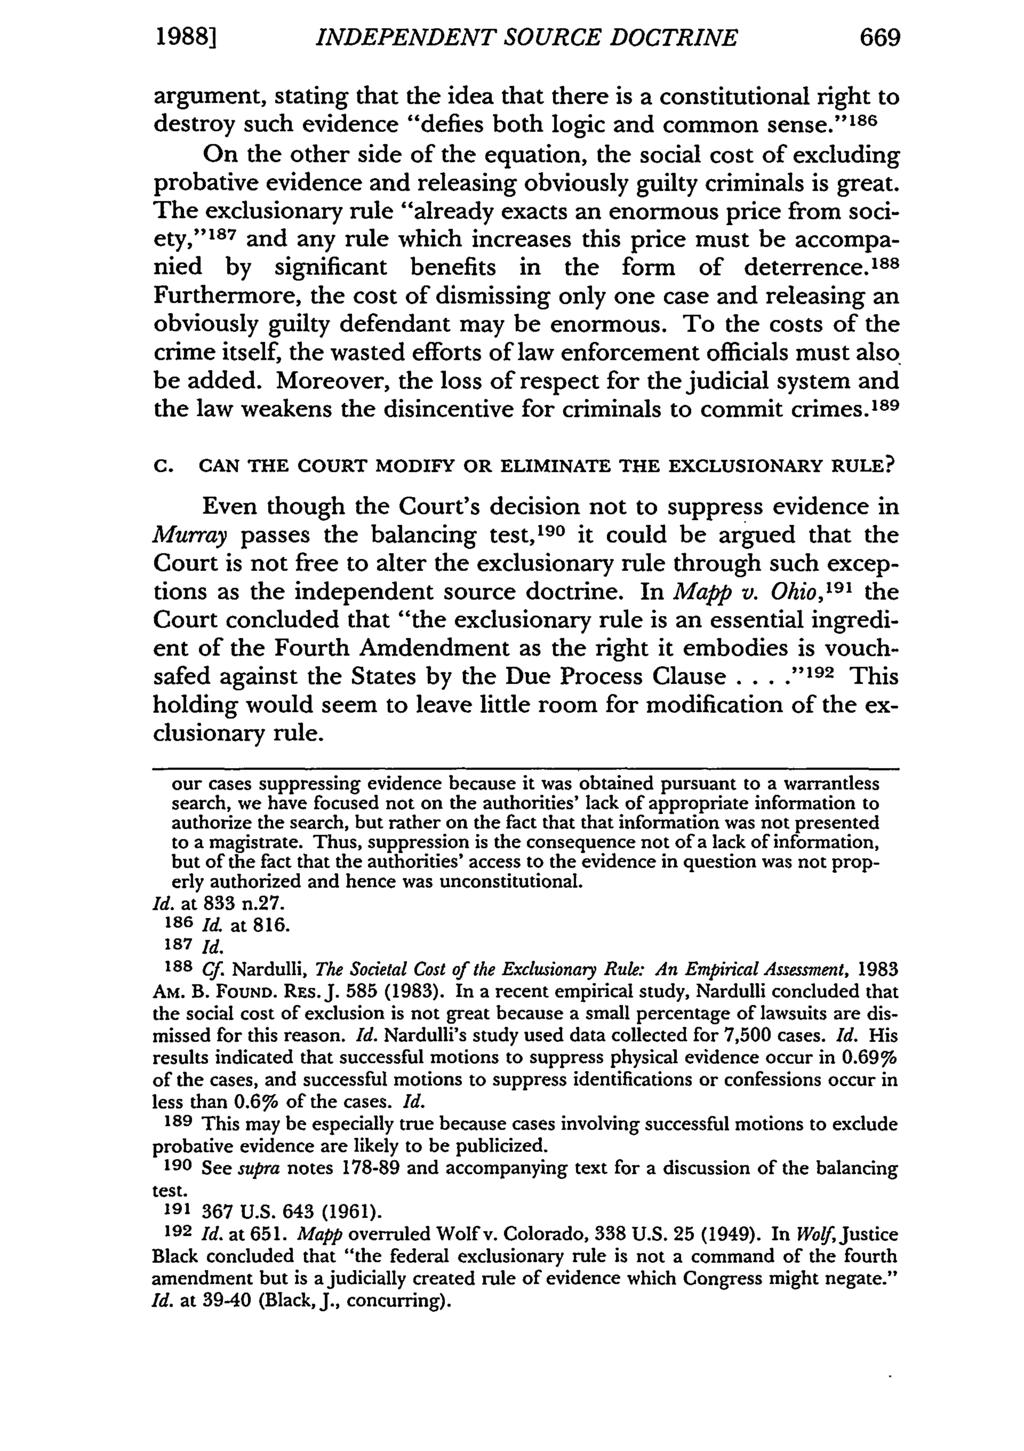 1988] INDEPENDENT SOURCE DOCTRINE 669 argument, stating that the idea that there is a constitutional right to destroy such evidence "defies both logic and common sense.